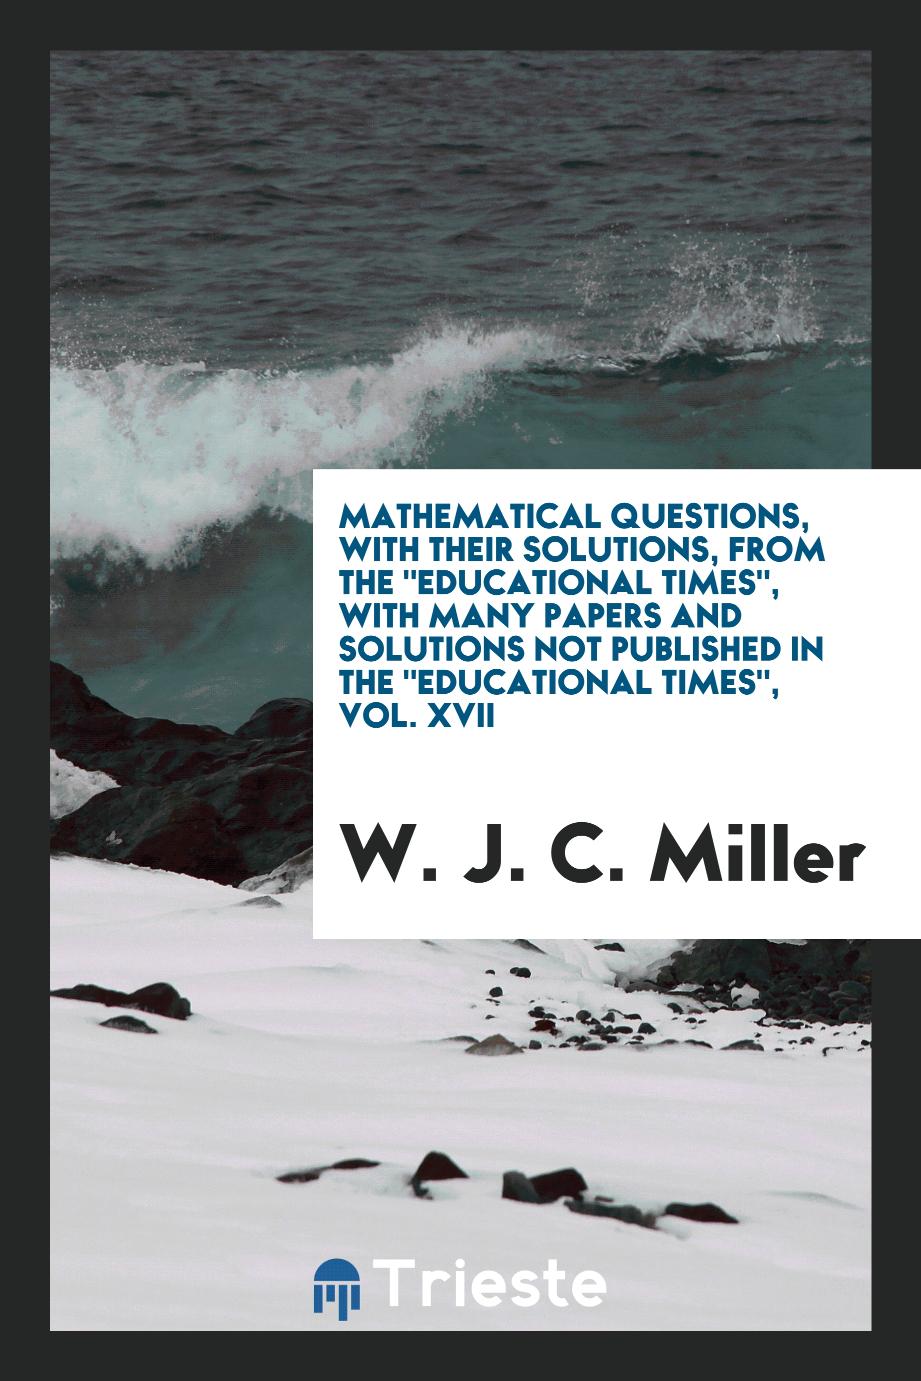 Mathematical Questions, with Their Solutions, from the "Educational Times", with Many Papers and Solutions Not Published in the "Educational Times", Vol. XVII